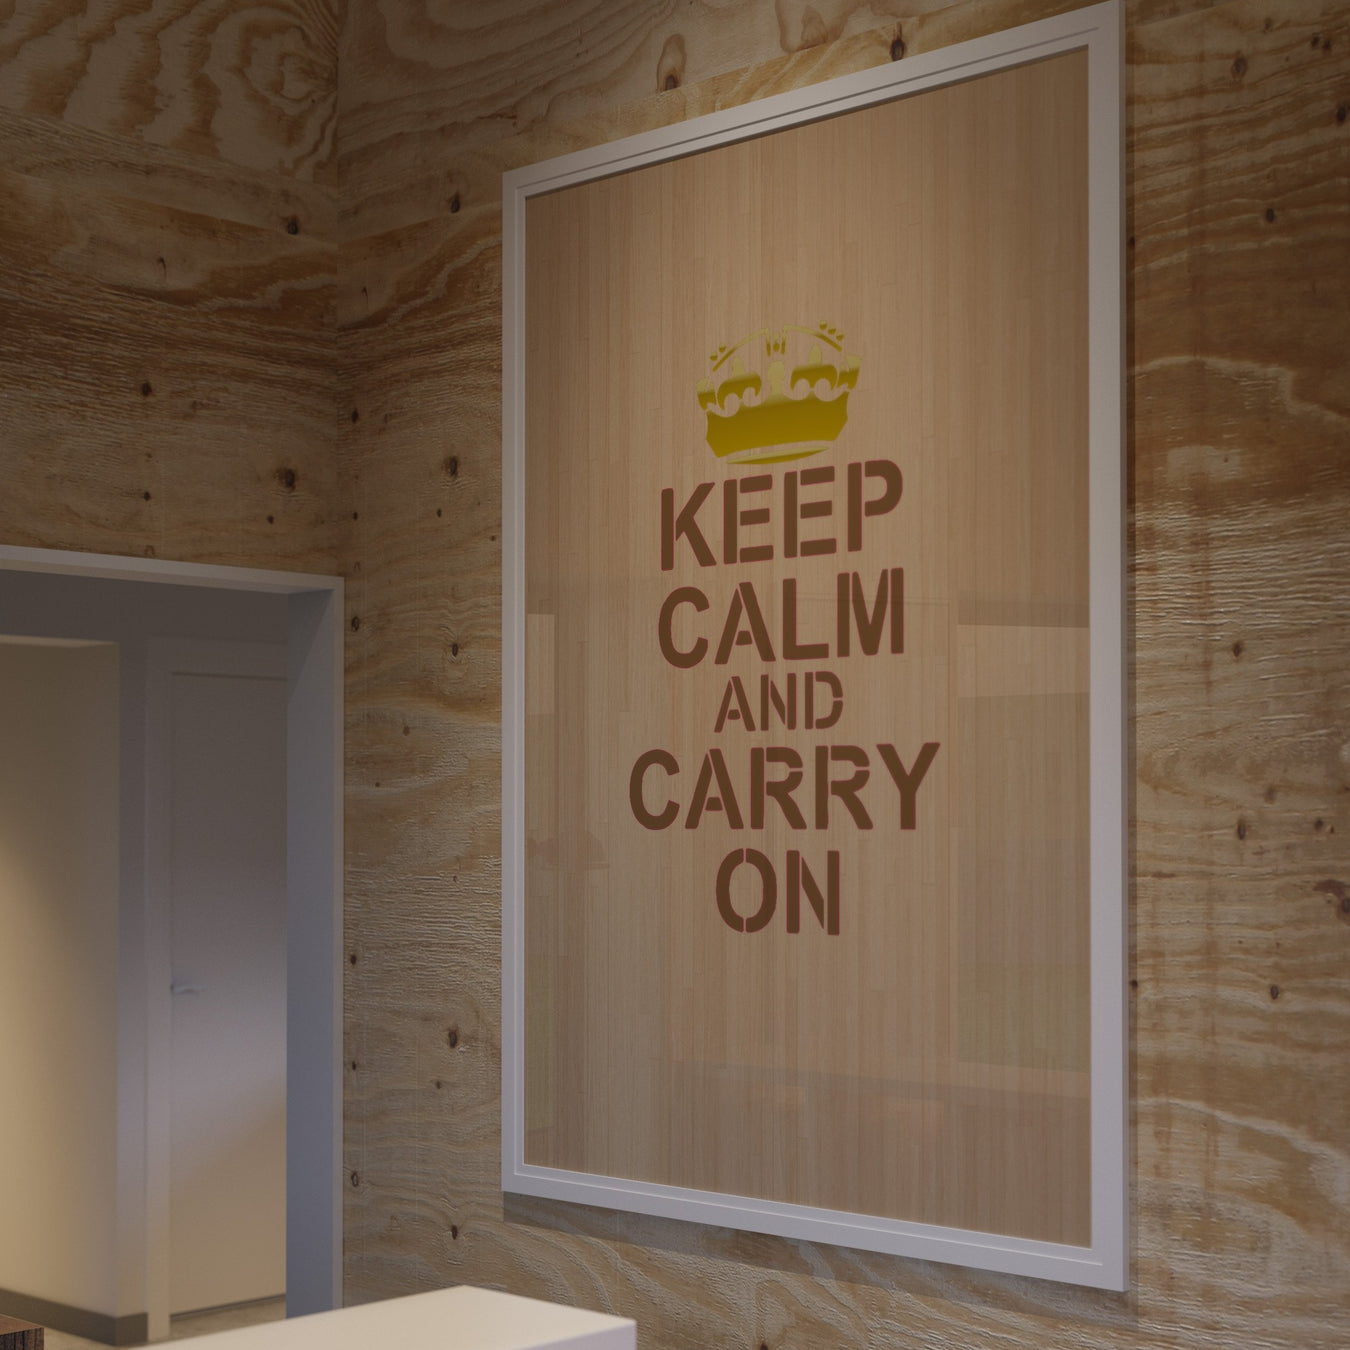 keep calm and carron on framed wall art painted using stencil